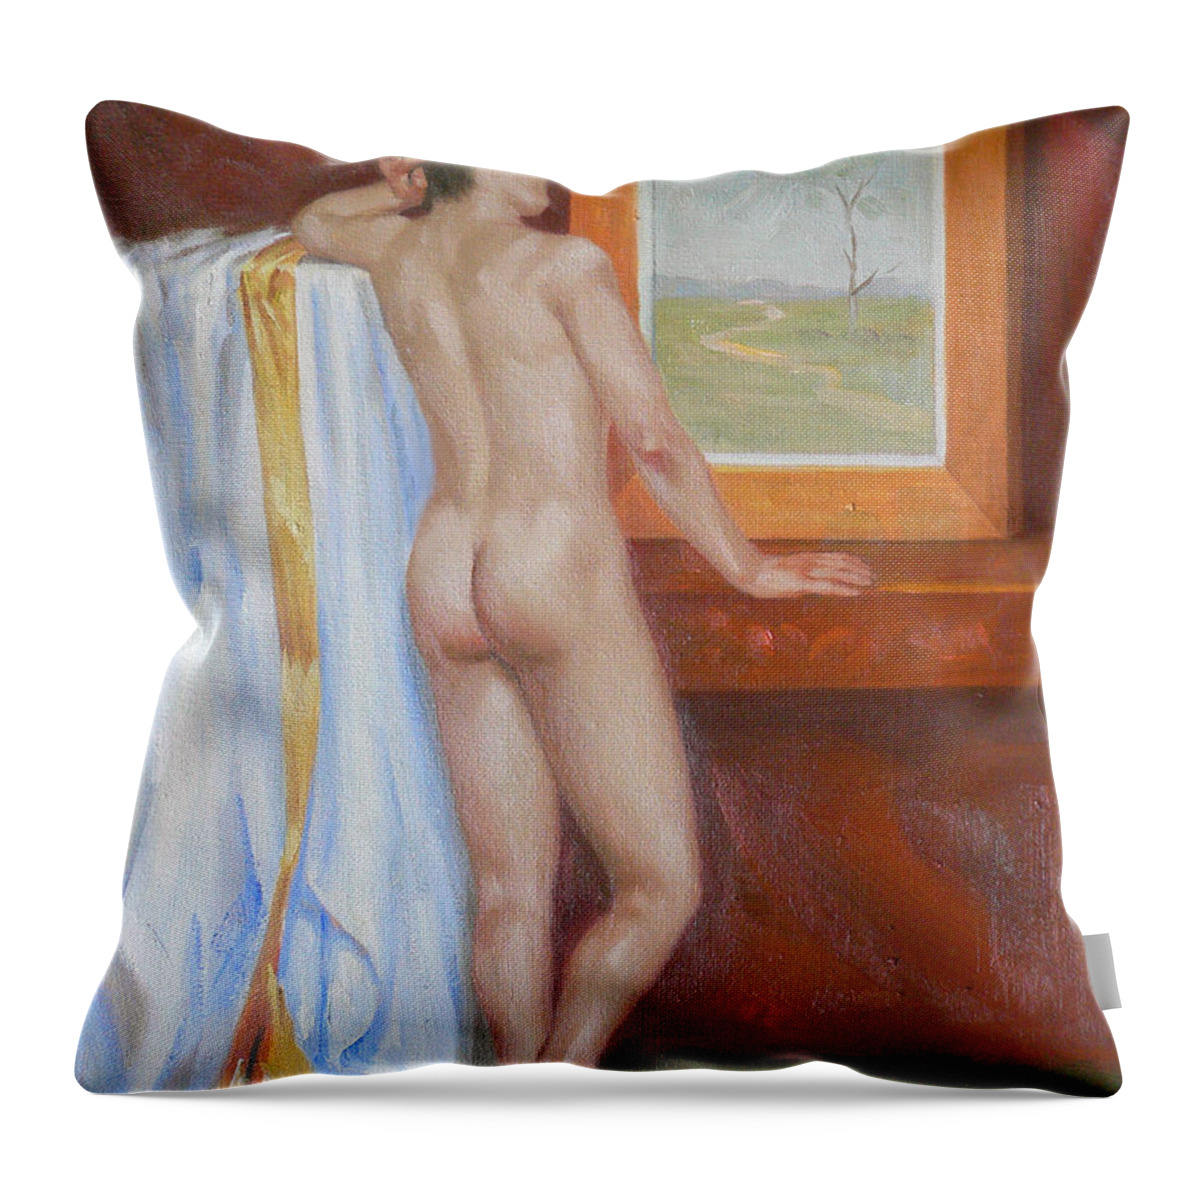 Original Gay Art Throw Pillow featuring the painting Original Oil Painting Male Nude Man Body Art Young Boy On Canvas#16-2-6-09 by Hongtao Huang